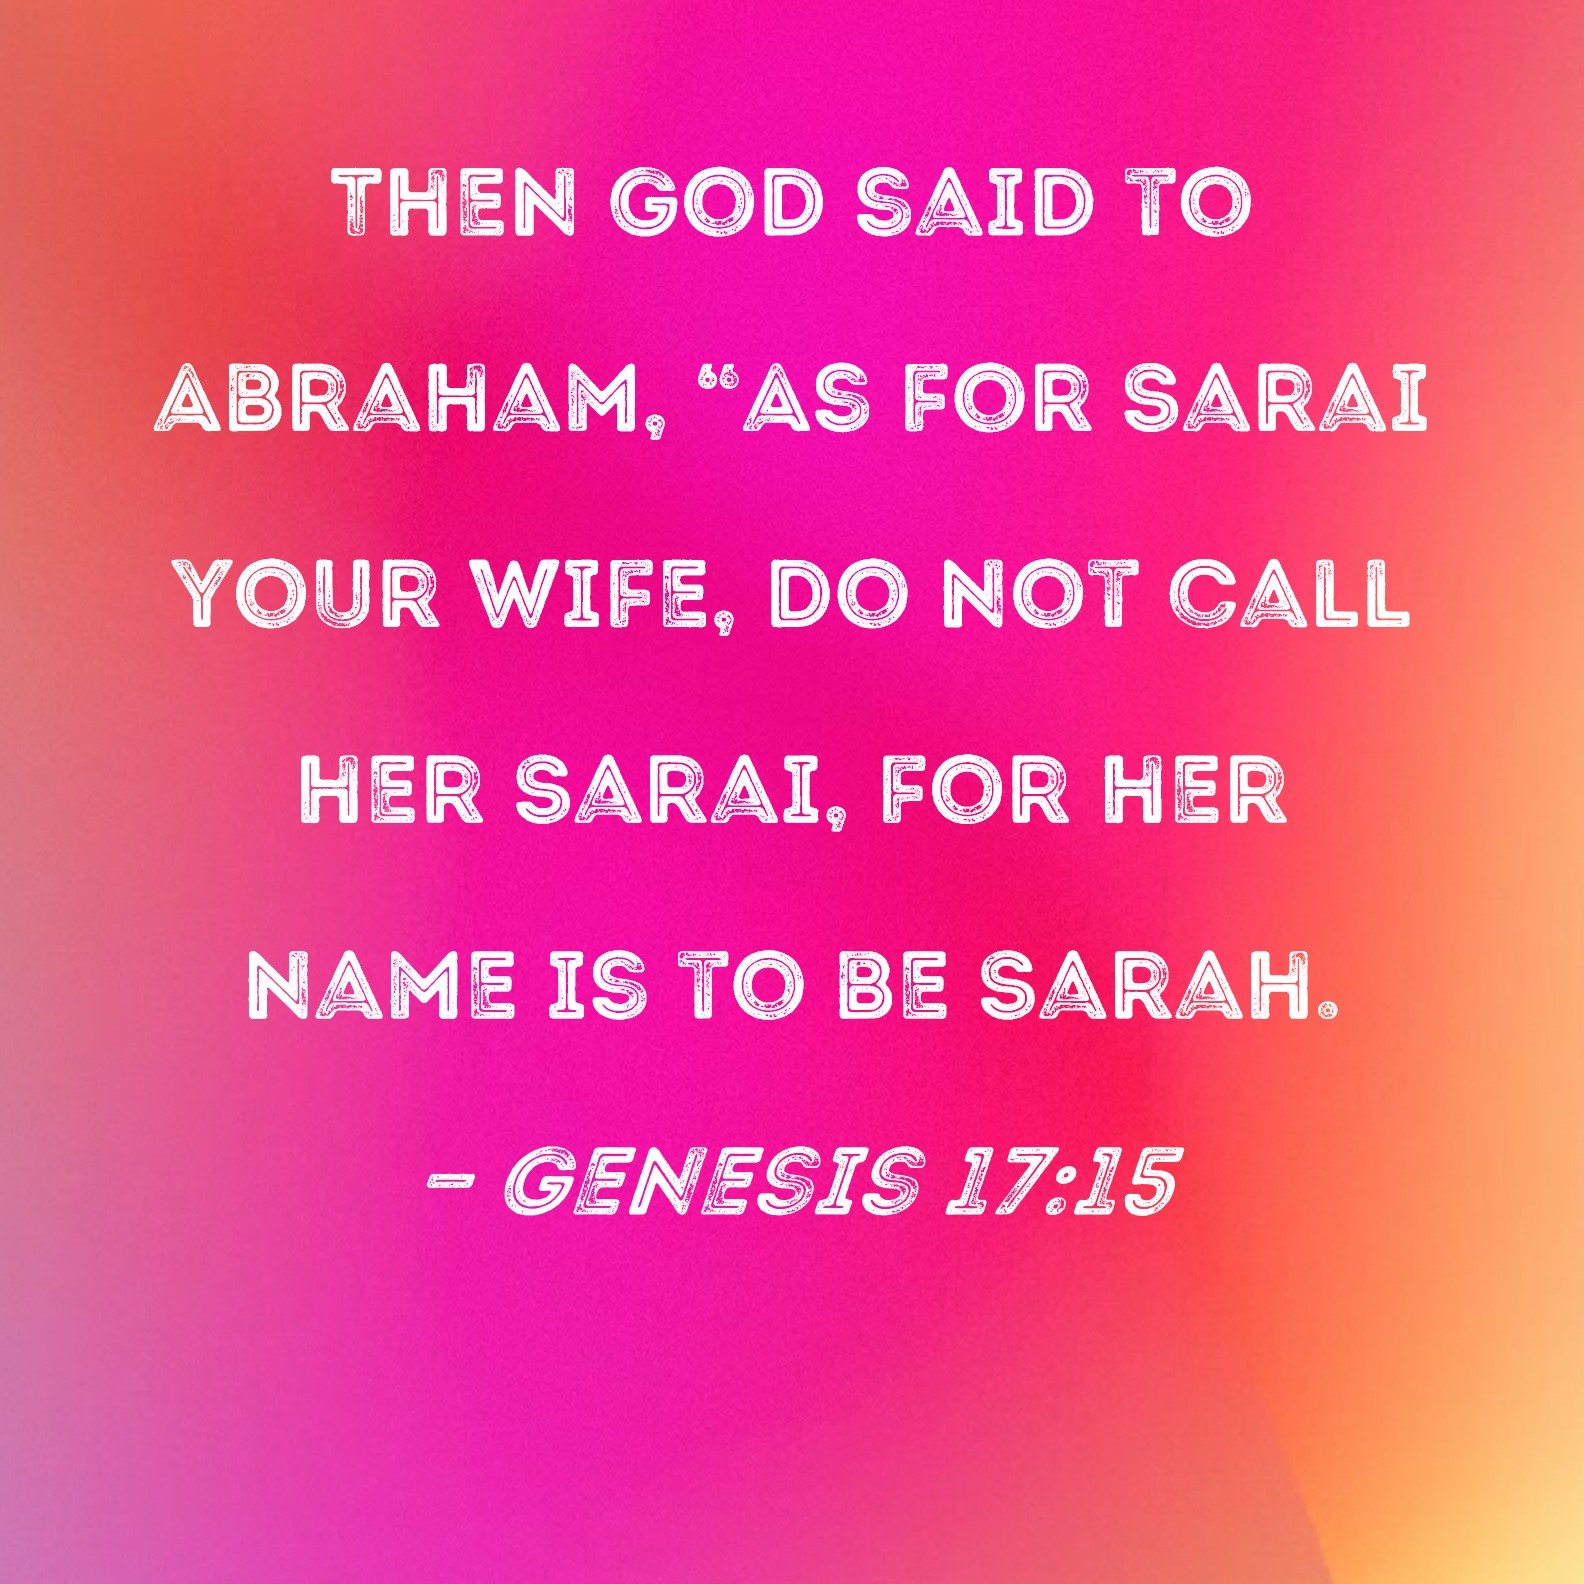 Genesis 1715 Then God Said To Abraham As For Sarai Your Wife Do Not